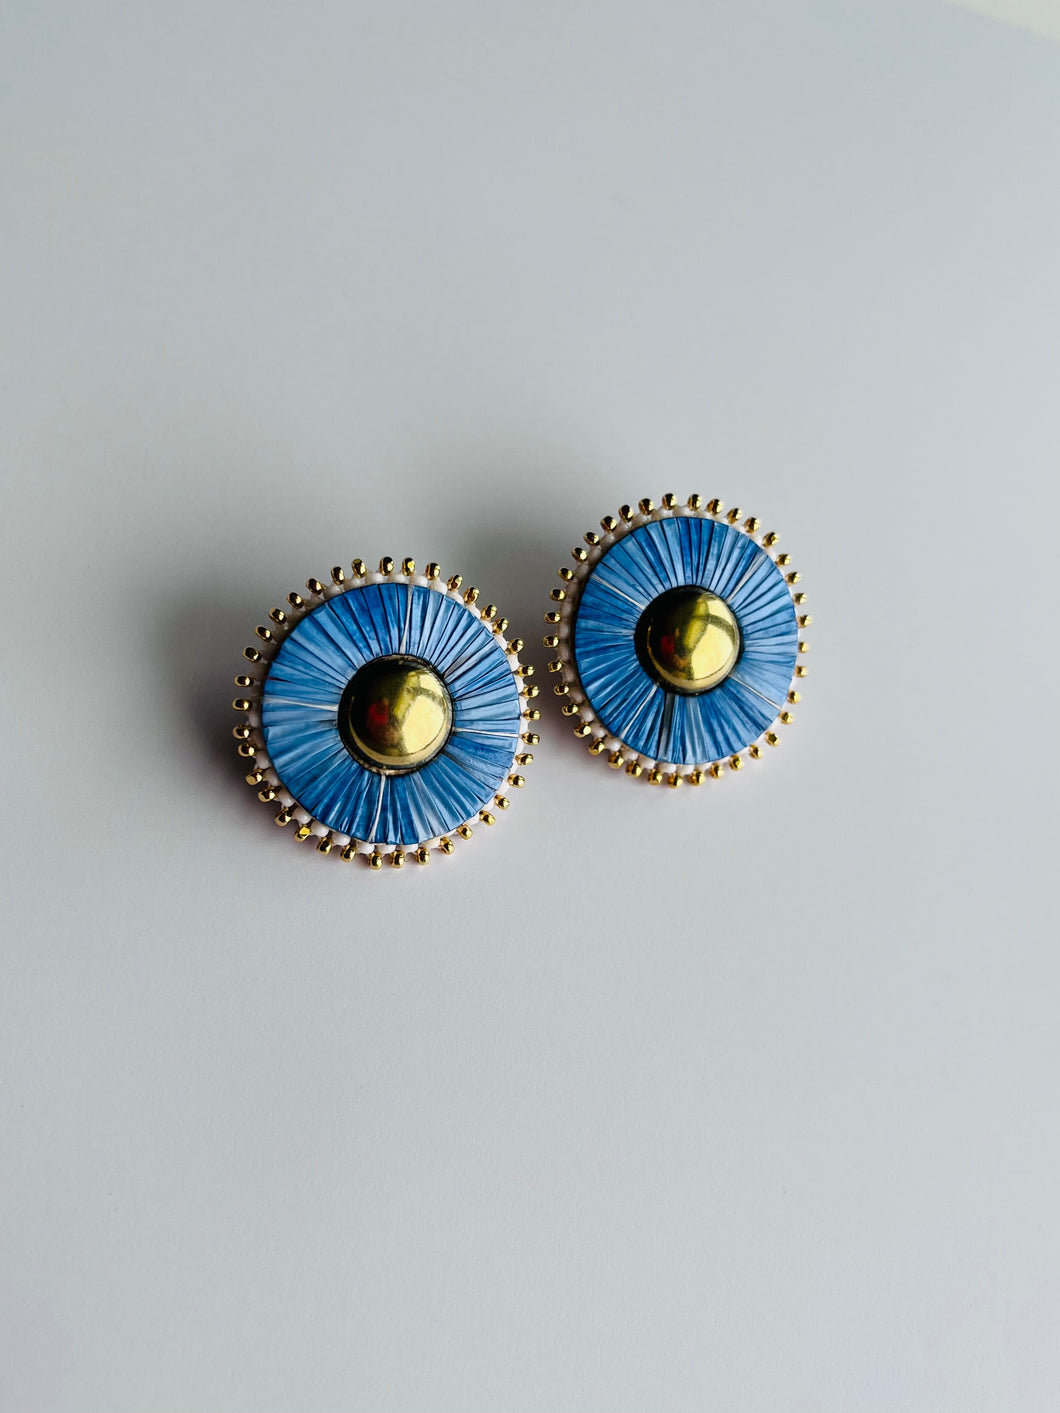 Porcupine Quill Studs + Skyy Blue +